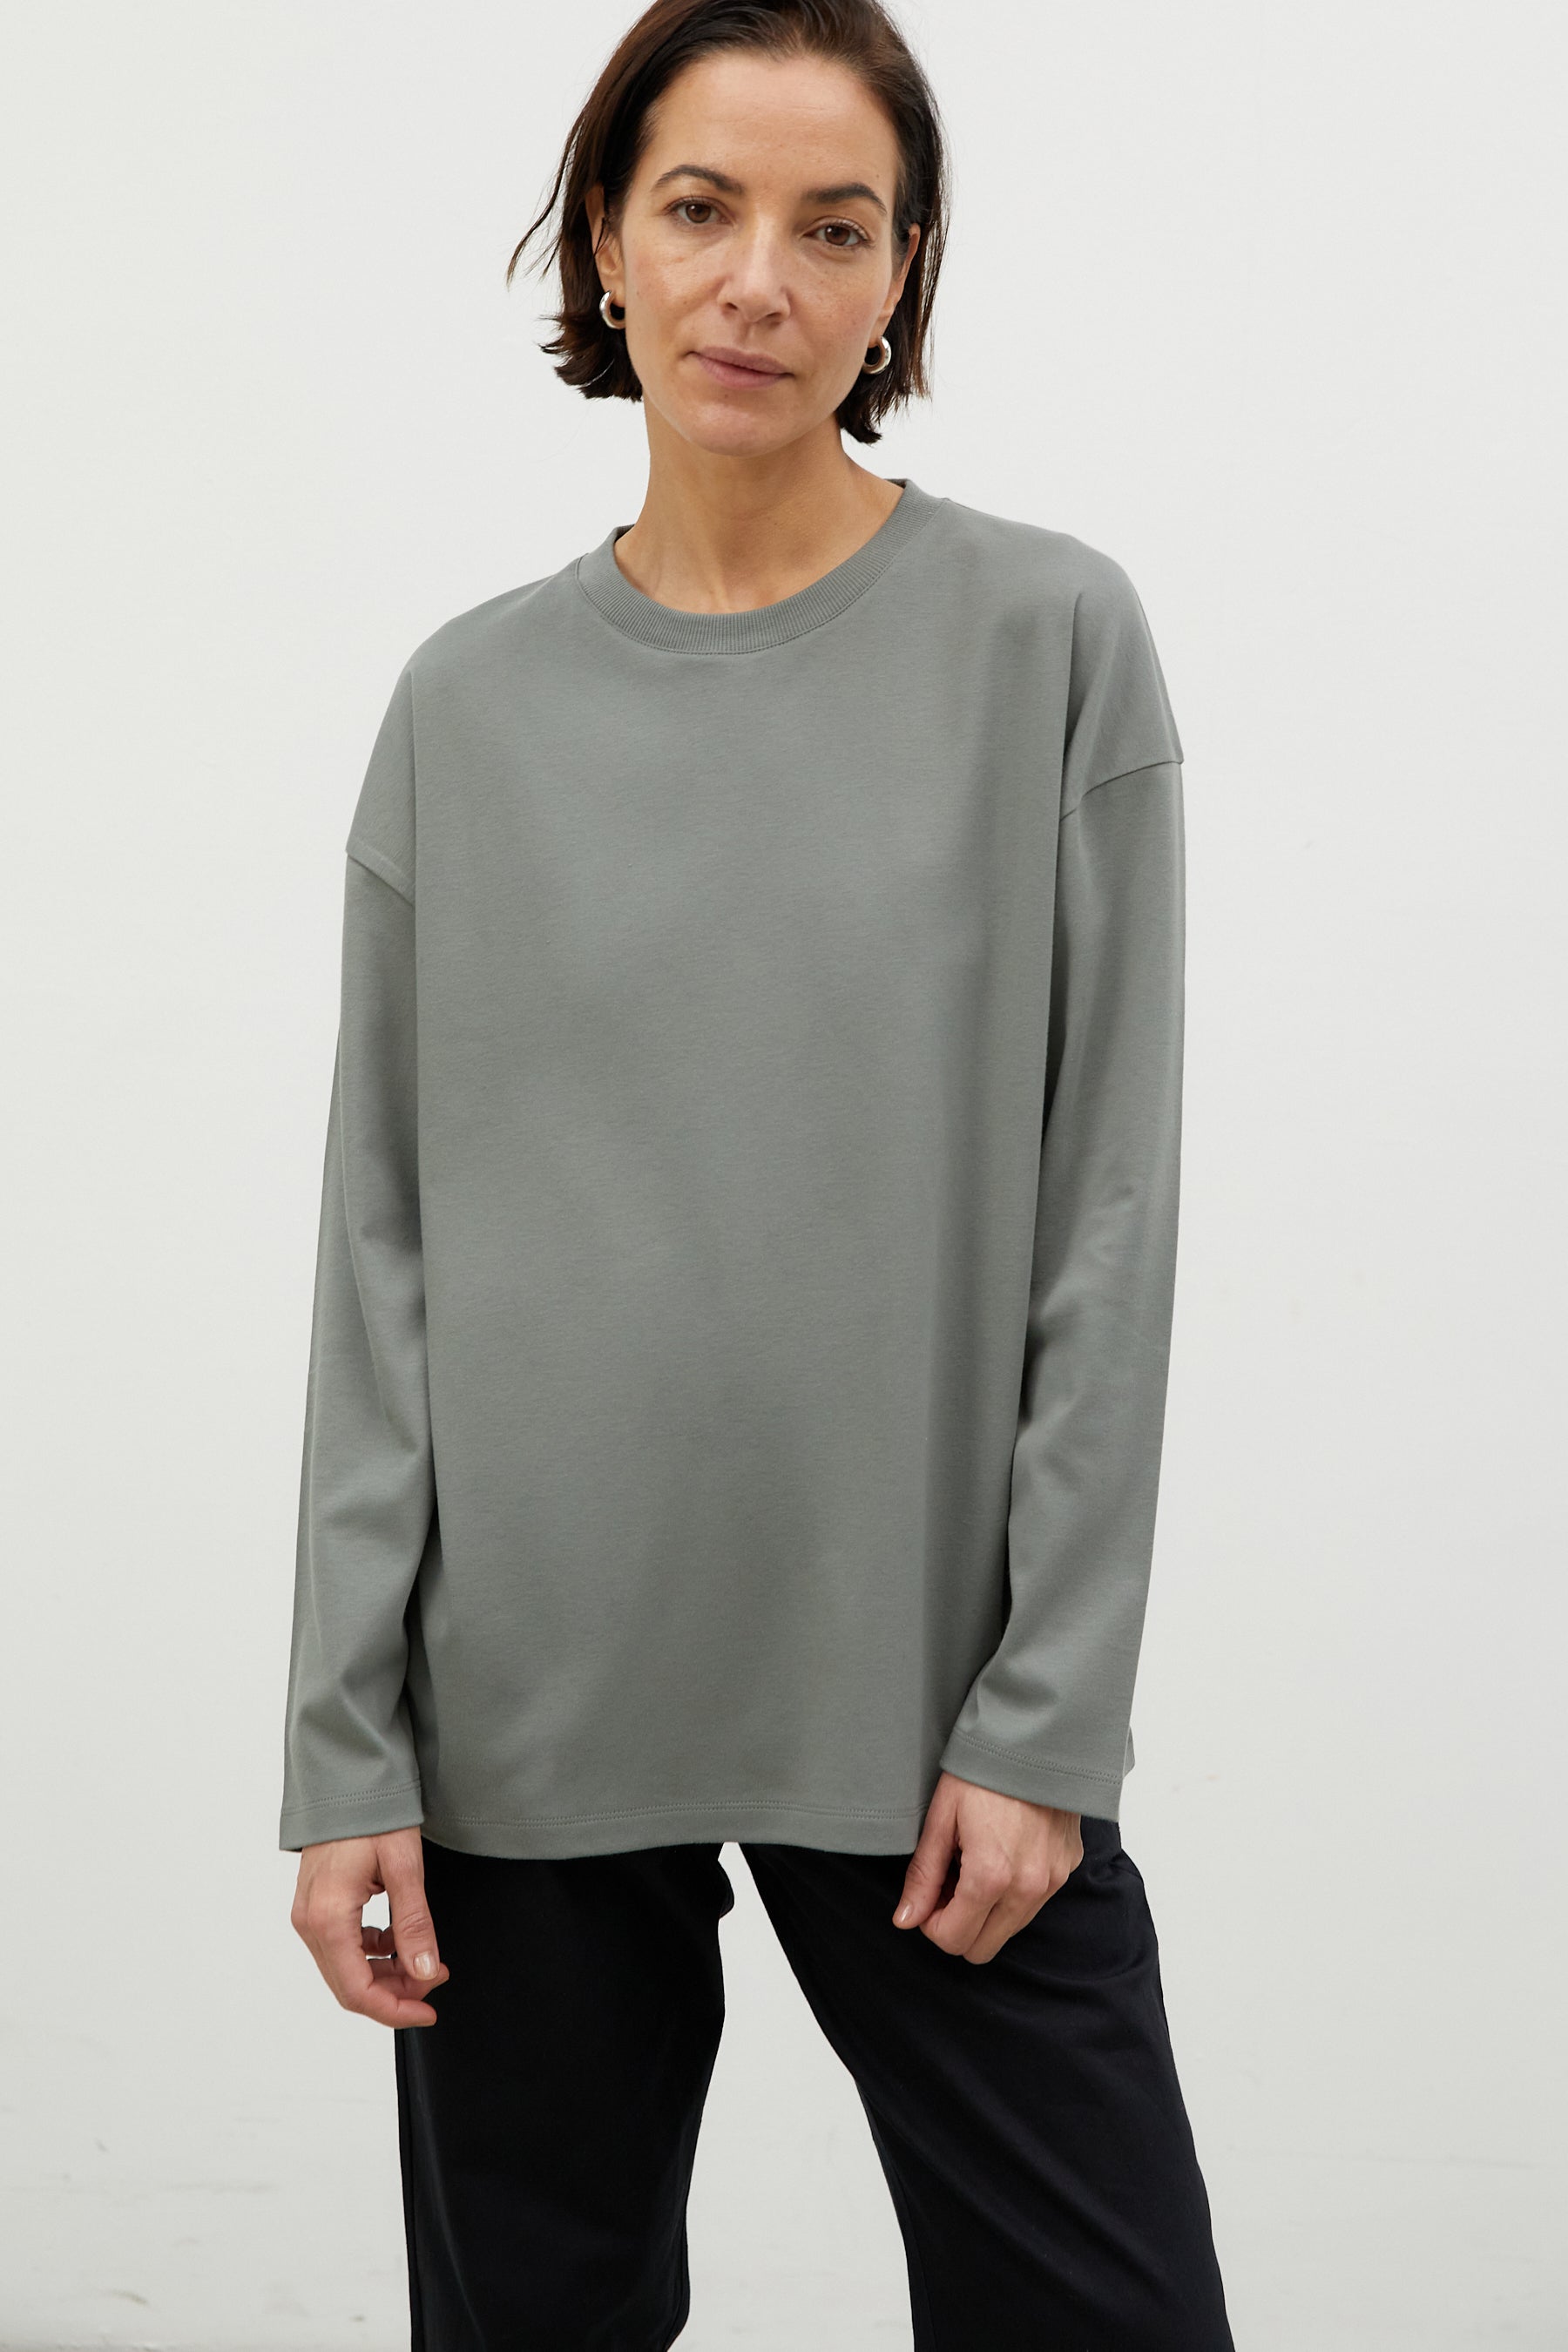 The Slow Label Long-Sleeve Tee